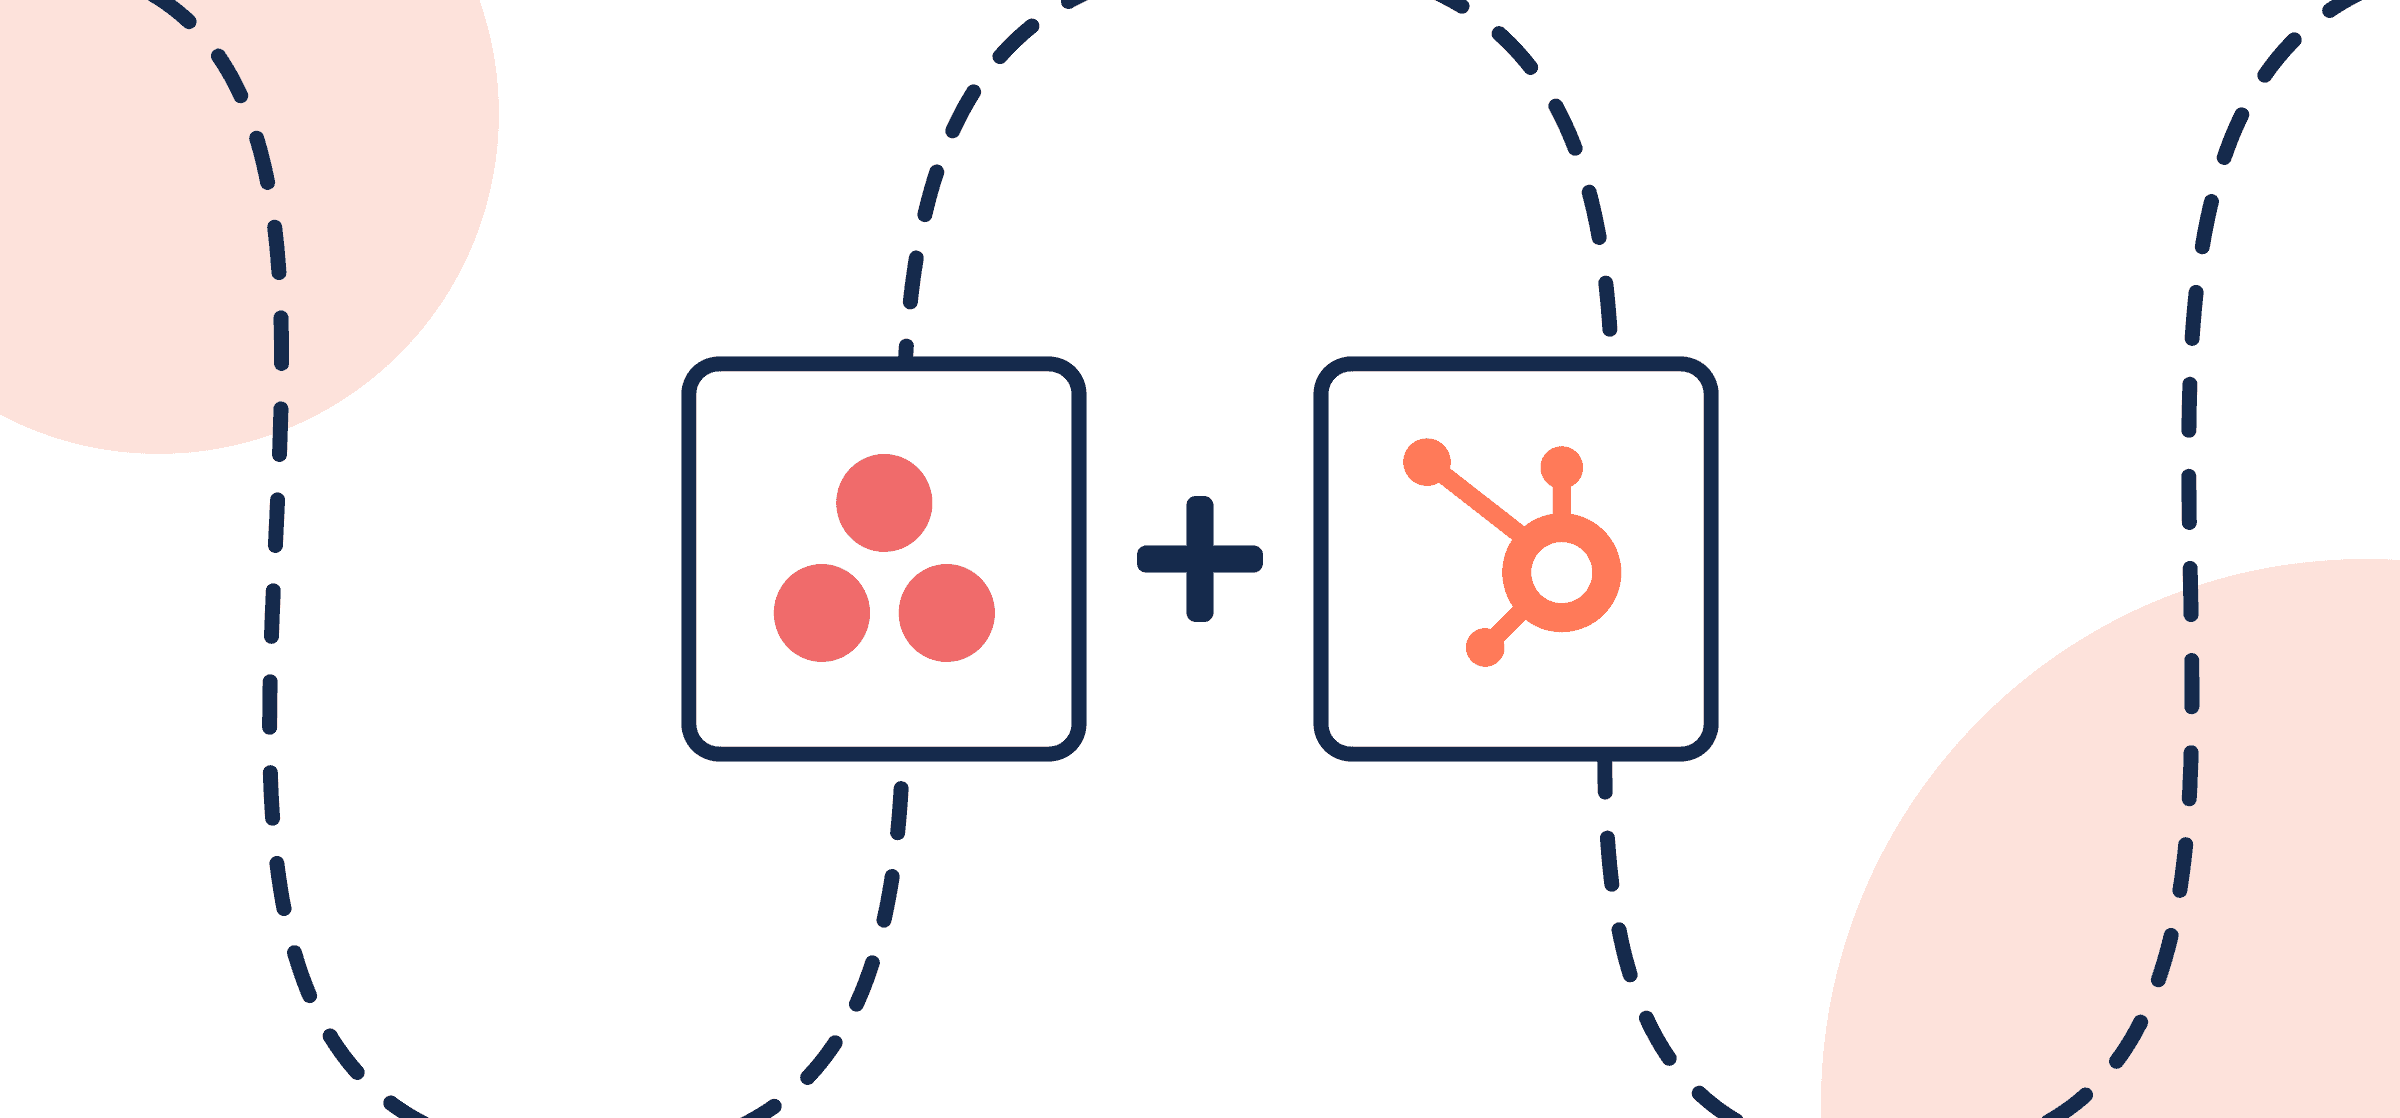 Featured image displaying the logos of Asana and HubSpot in Unito's guide to setting up a simple Two-Way Sync